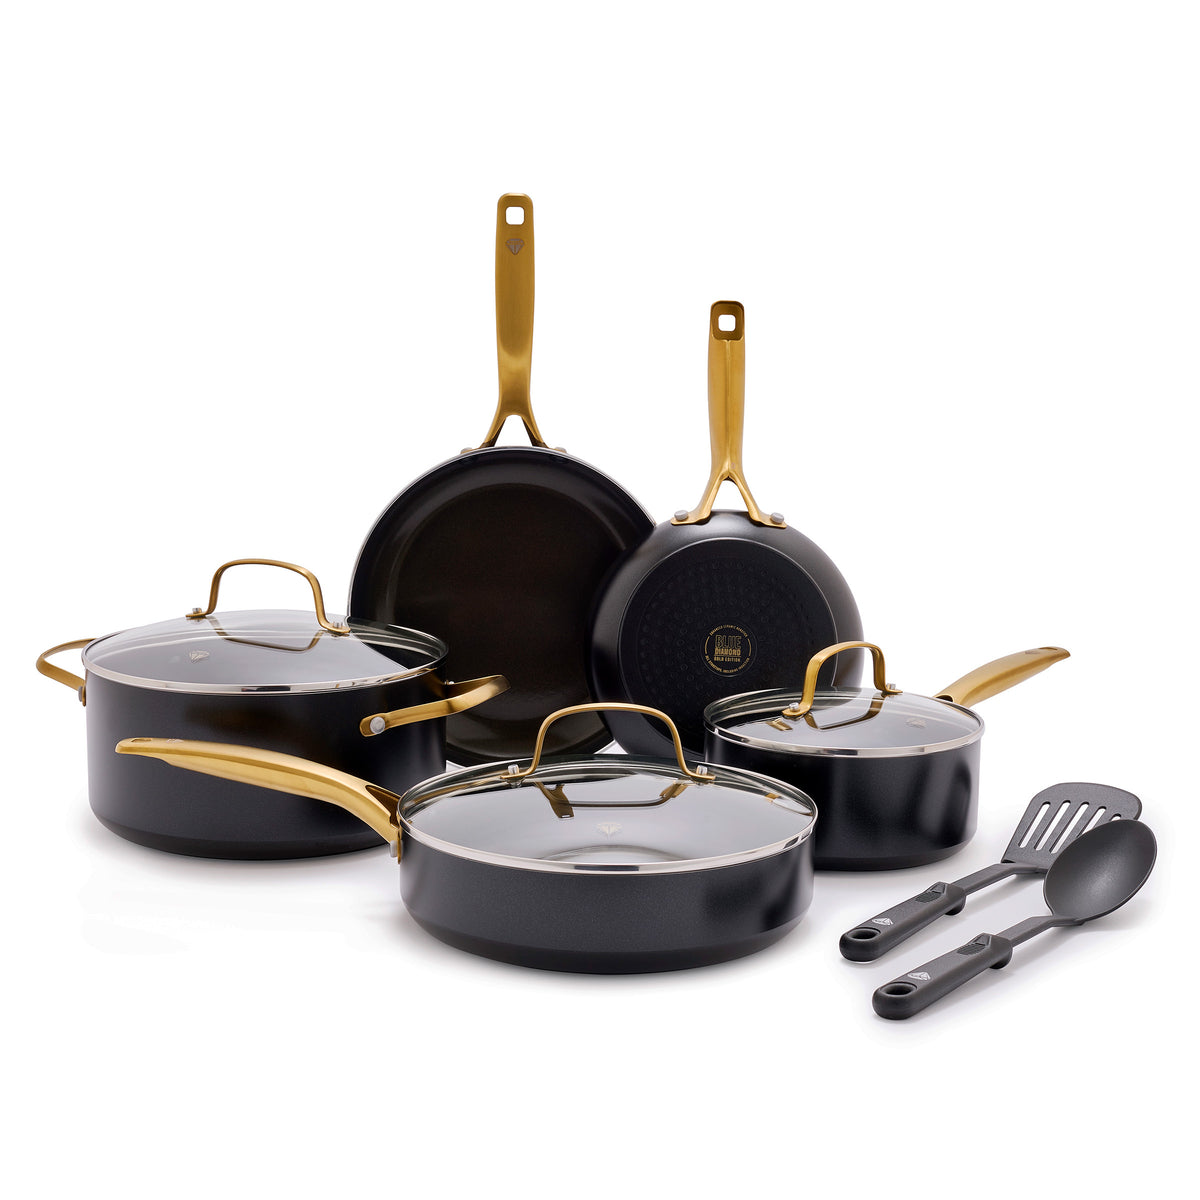 Source Nonstick Induction Pots and Pans Aluminum Classic Black Cookware Set  with Utensils Kitchenware 21 Pcs Kitchen Non Stick Support on m.